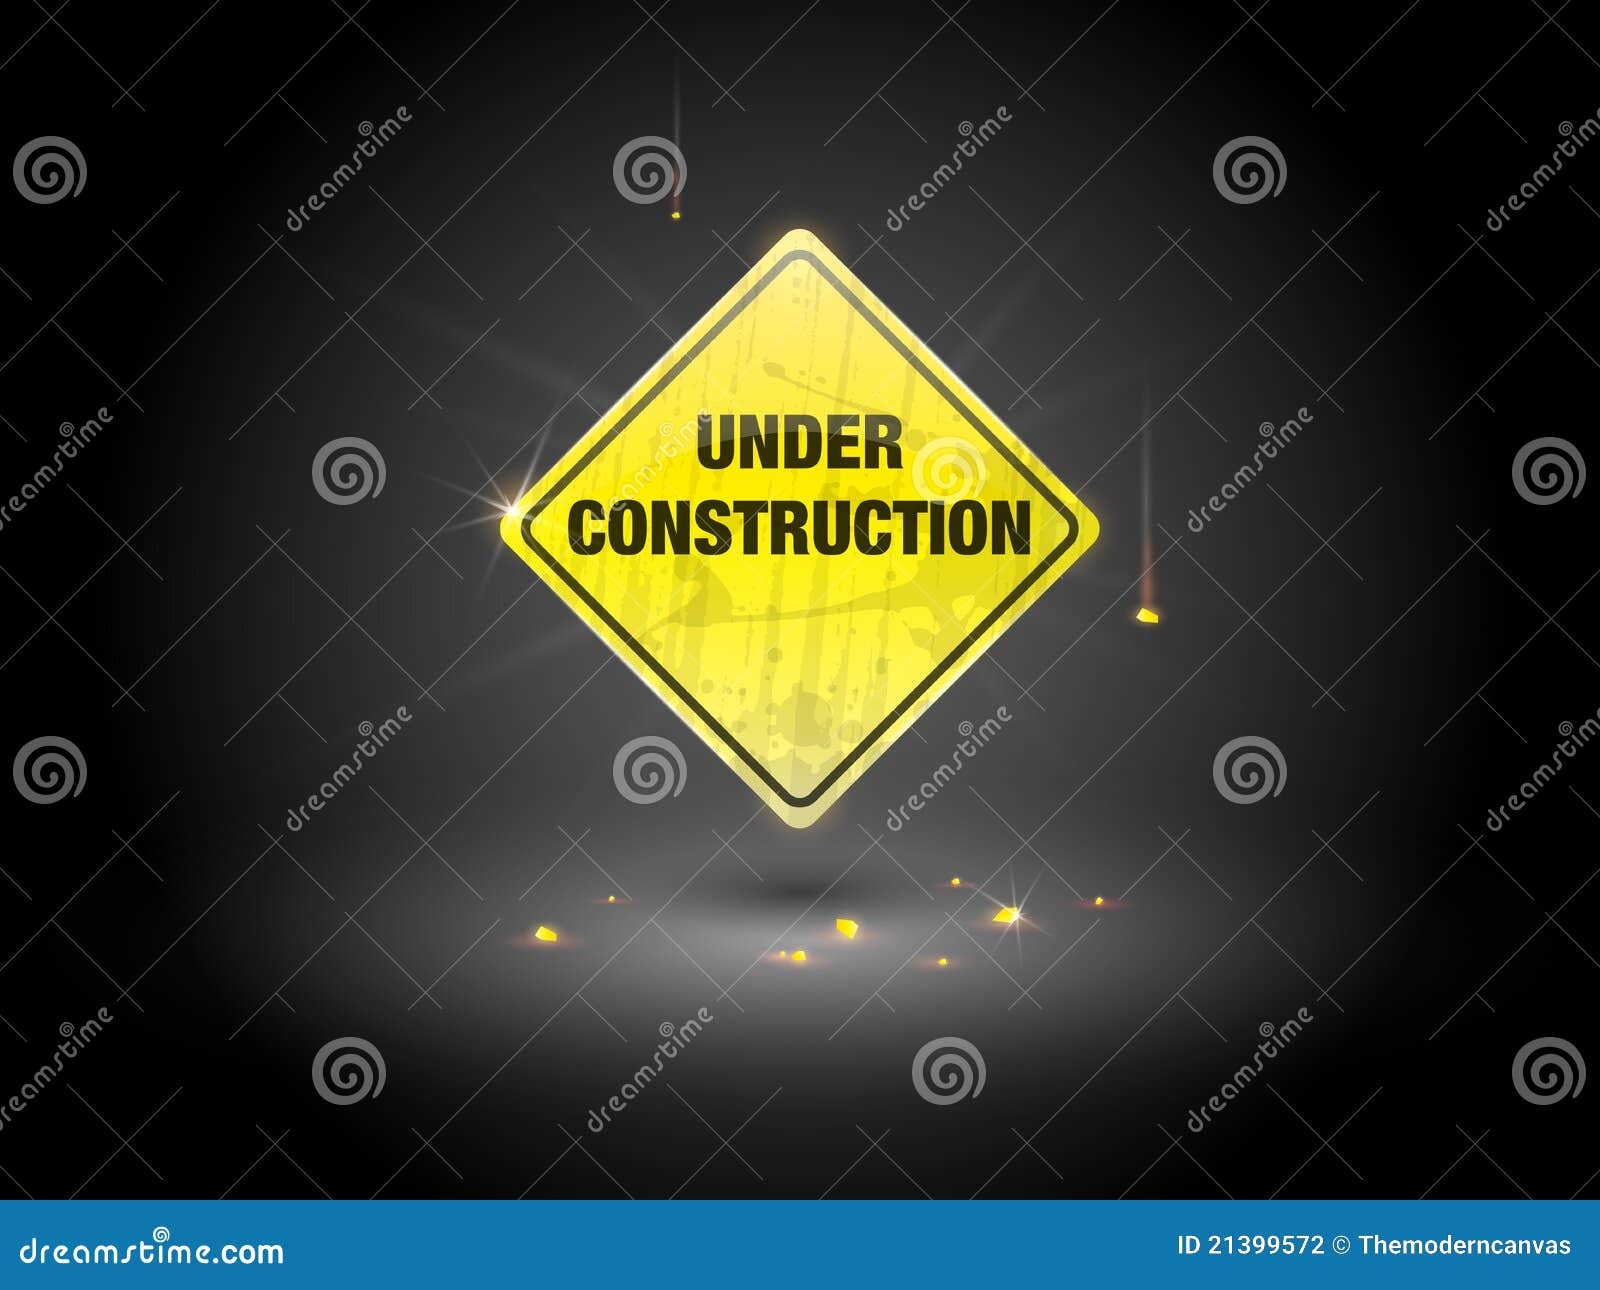 Under Construction Sign stock vector. Illustration of service - 21399572